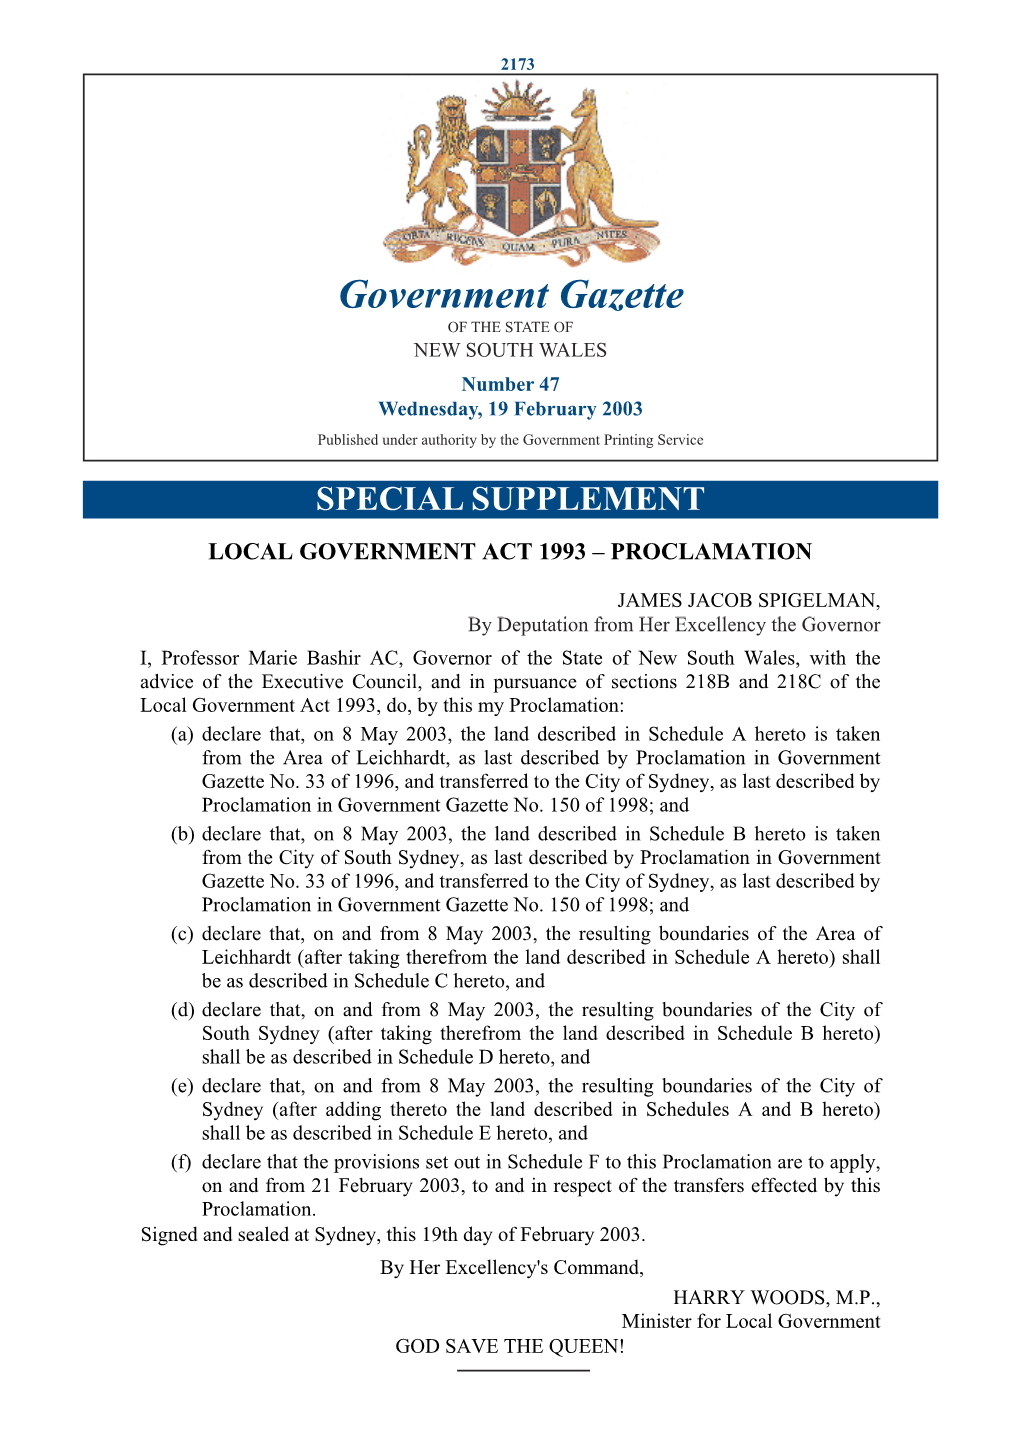 Government Gazette of the STATE of NEW SOUTH WALES Number 47 Wednesday, 19 February 2003 Published Under Authority by the Government Printing Service